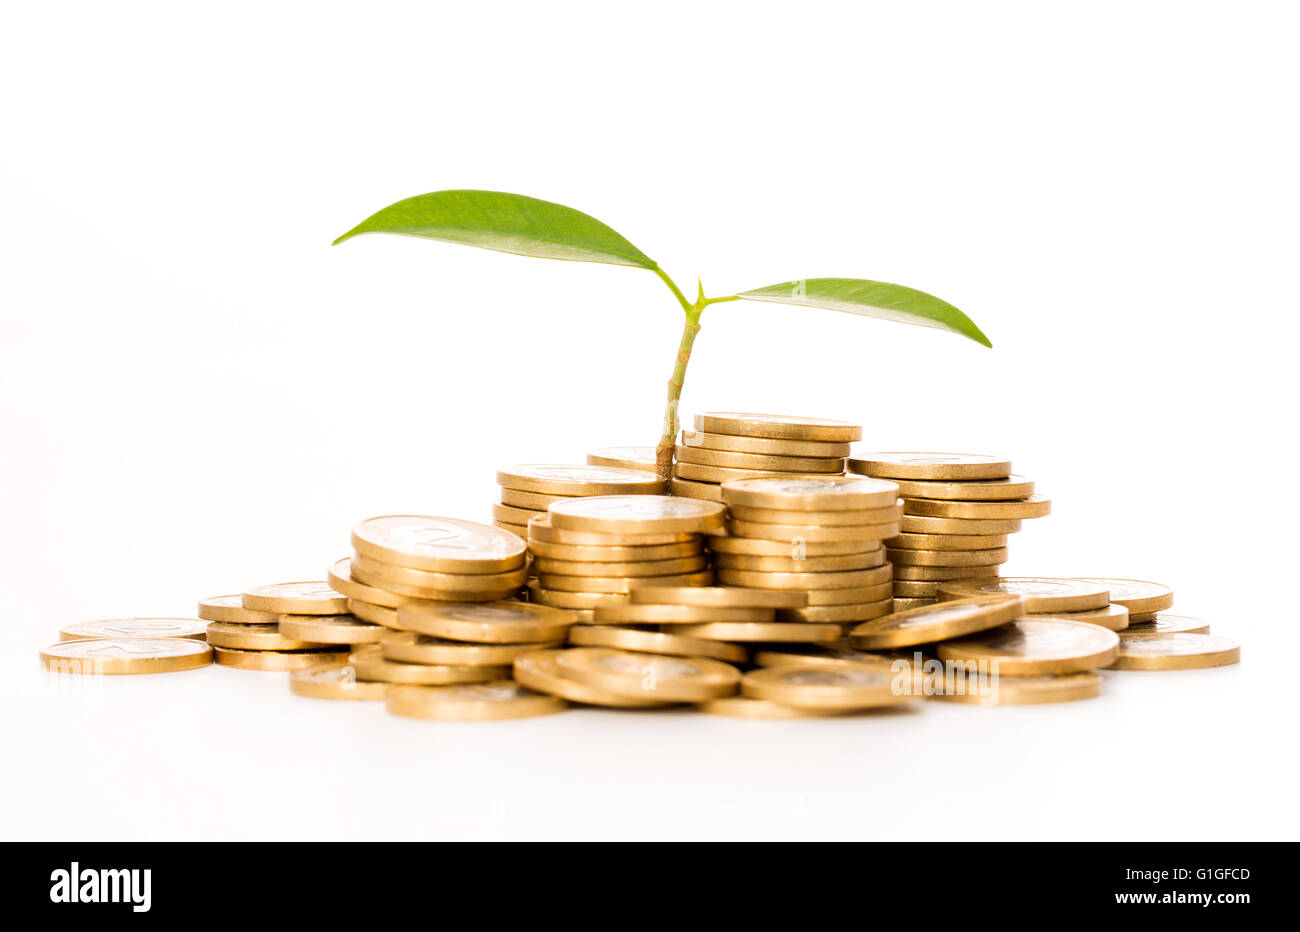 Money concept. Plant growing on coins. Stock Photo